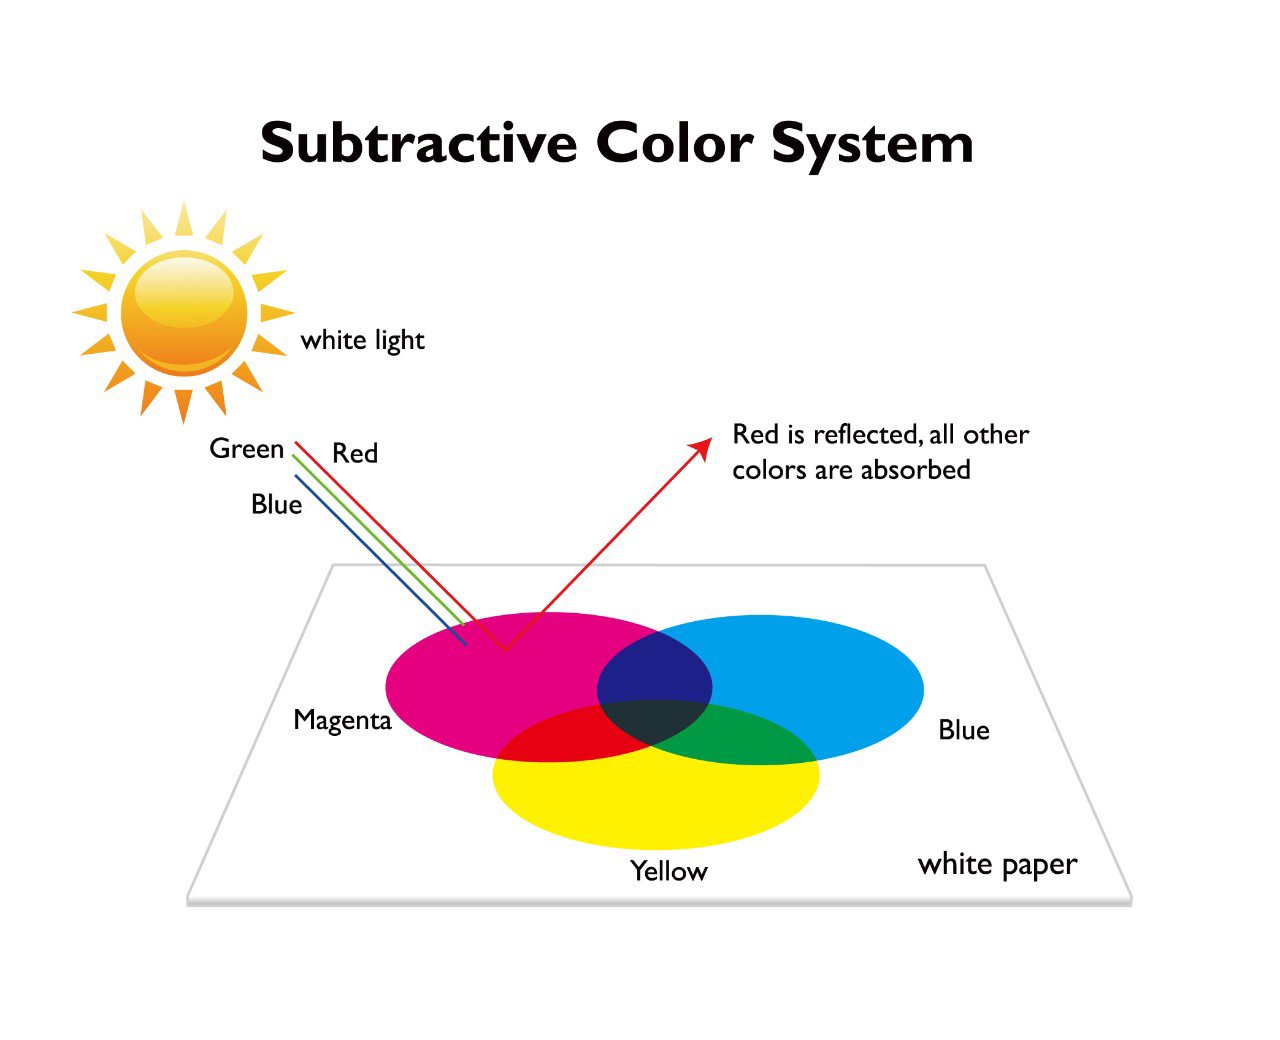 The picture takes red light for example and explains all other colors are absorbed when right light is reflected from the sun to the white paper in subtractive color system.